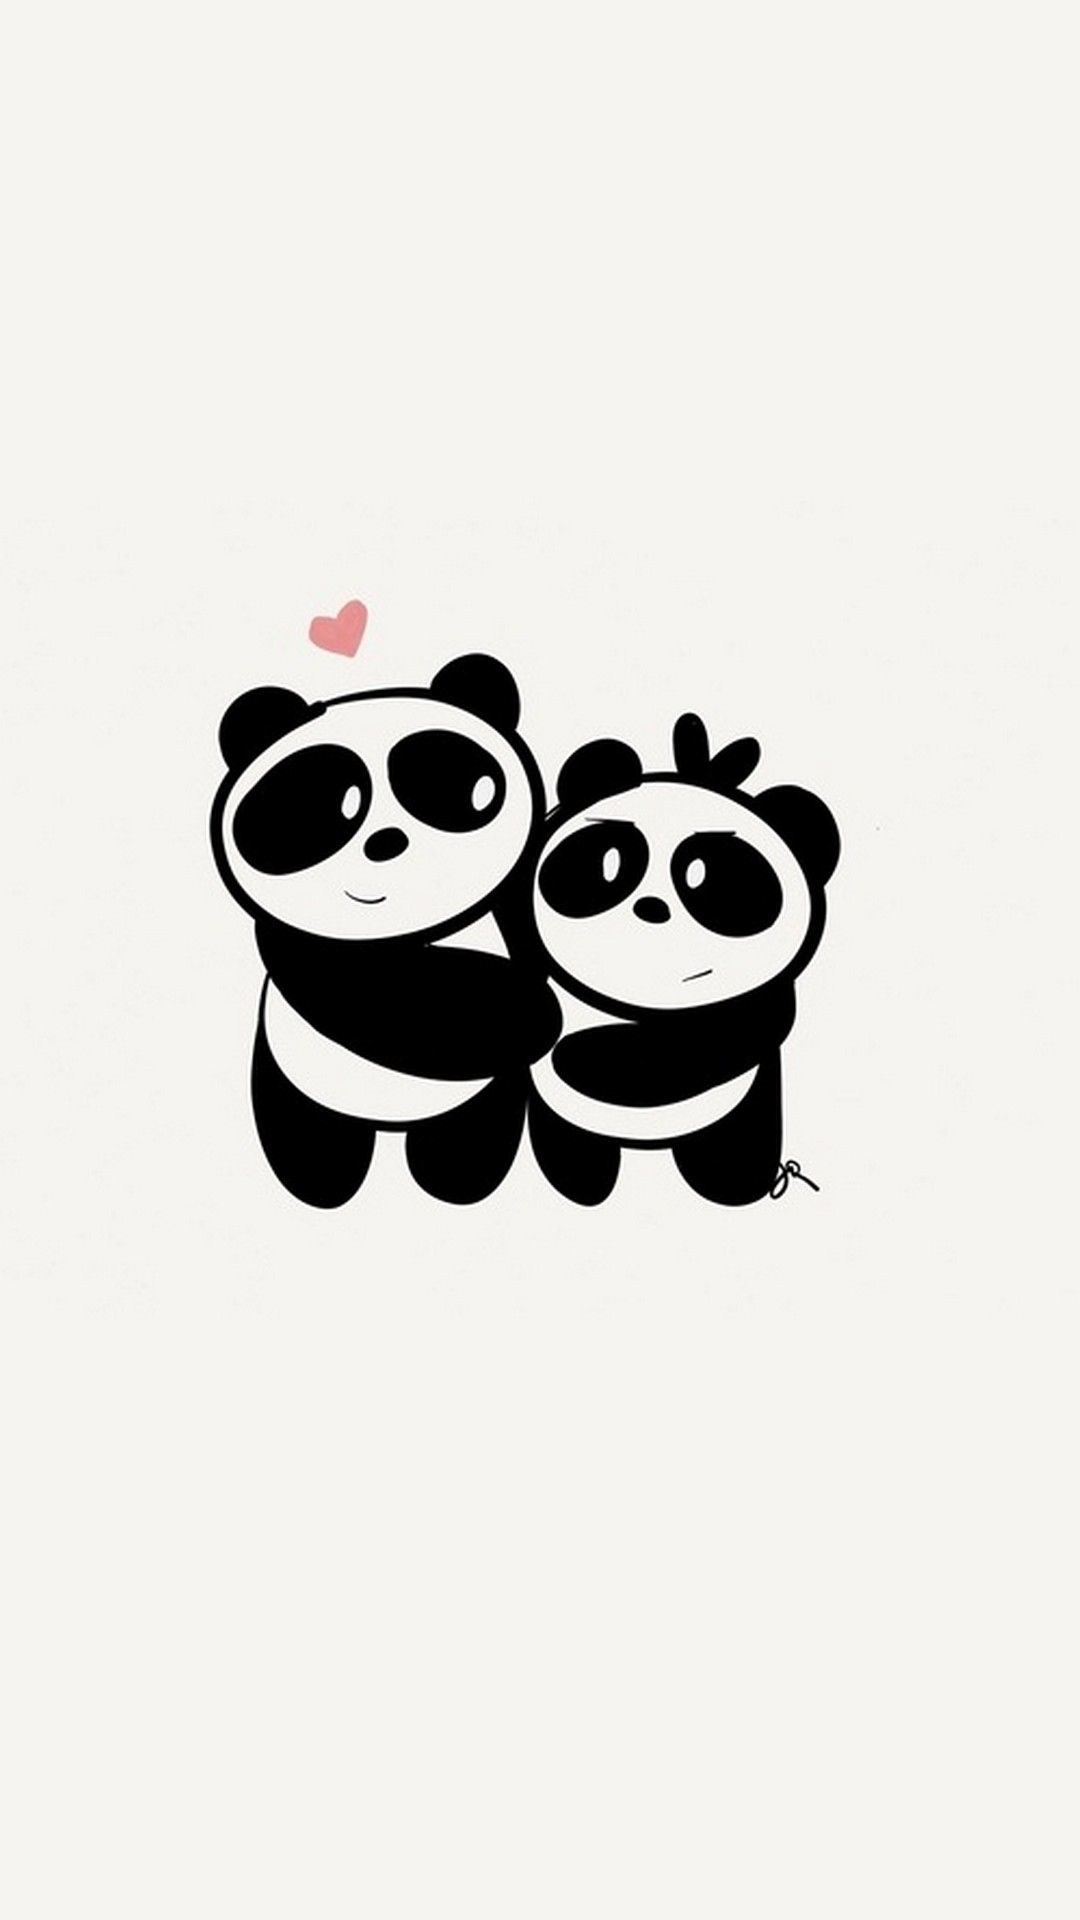 1080x1920 iPhone X Cute Couple Panda Wallpaper is high definition phone wallpaper.  You can make this wallpaper for your iPhone 5, 6, 7, 8, X backgrounds,  Tablet, ...